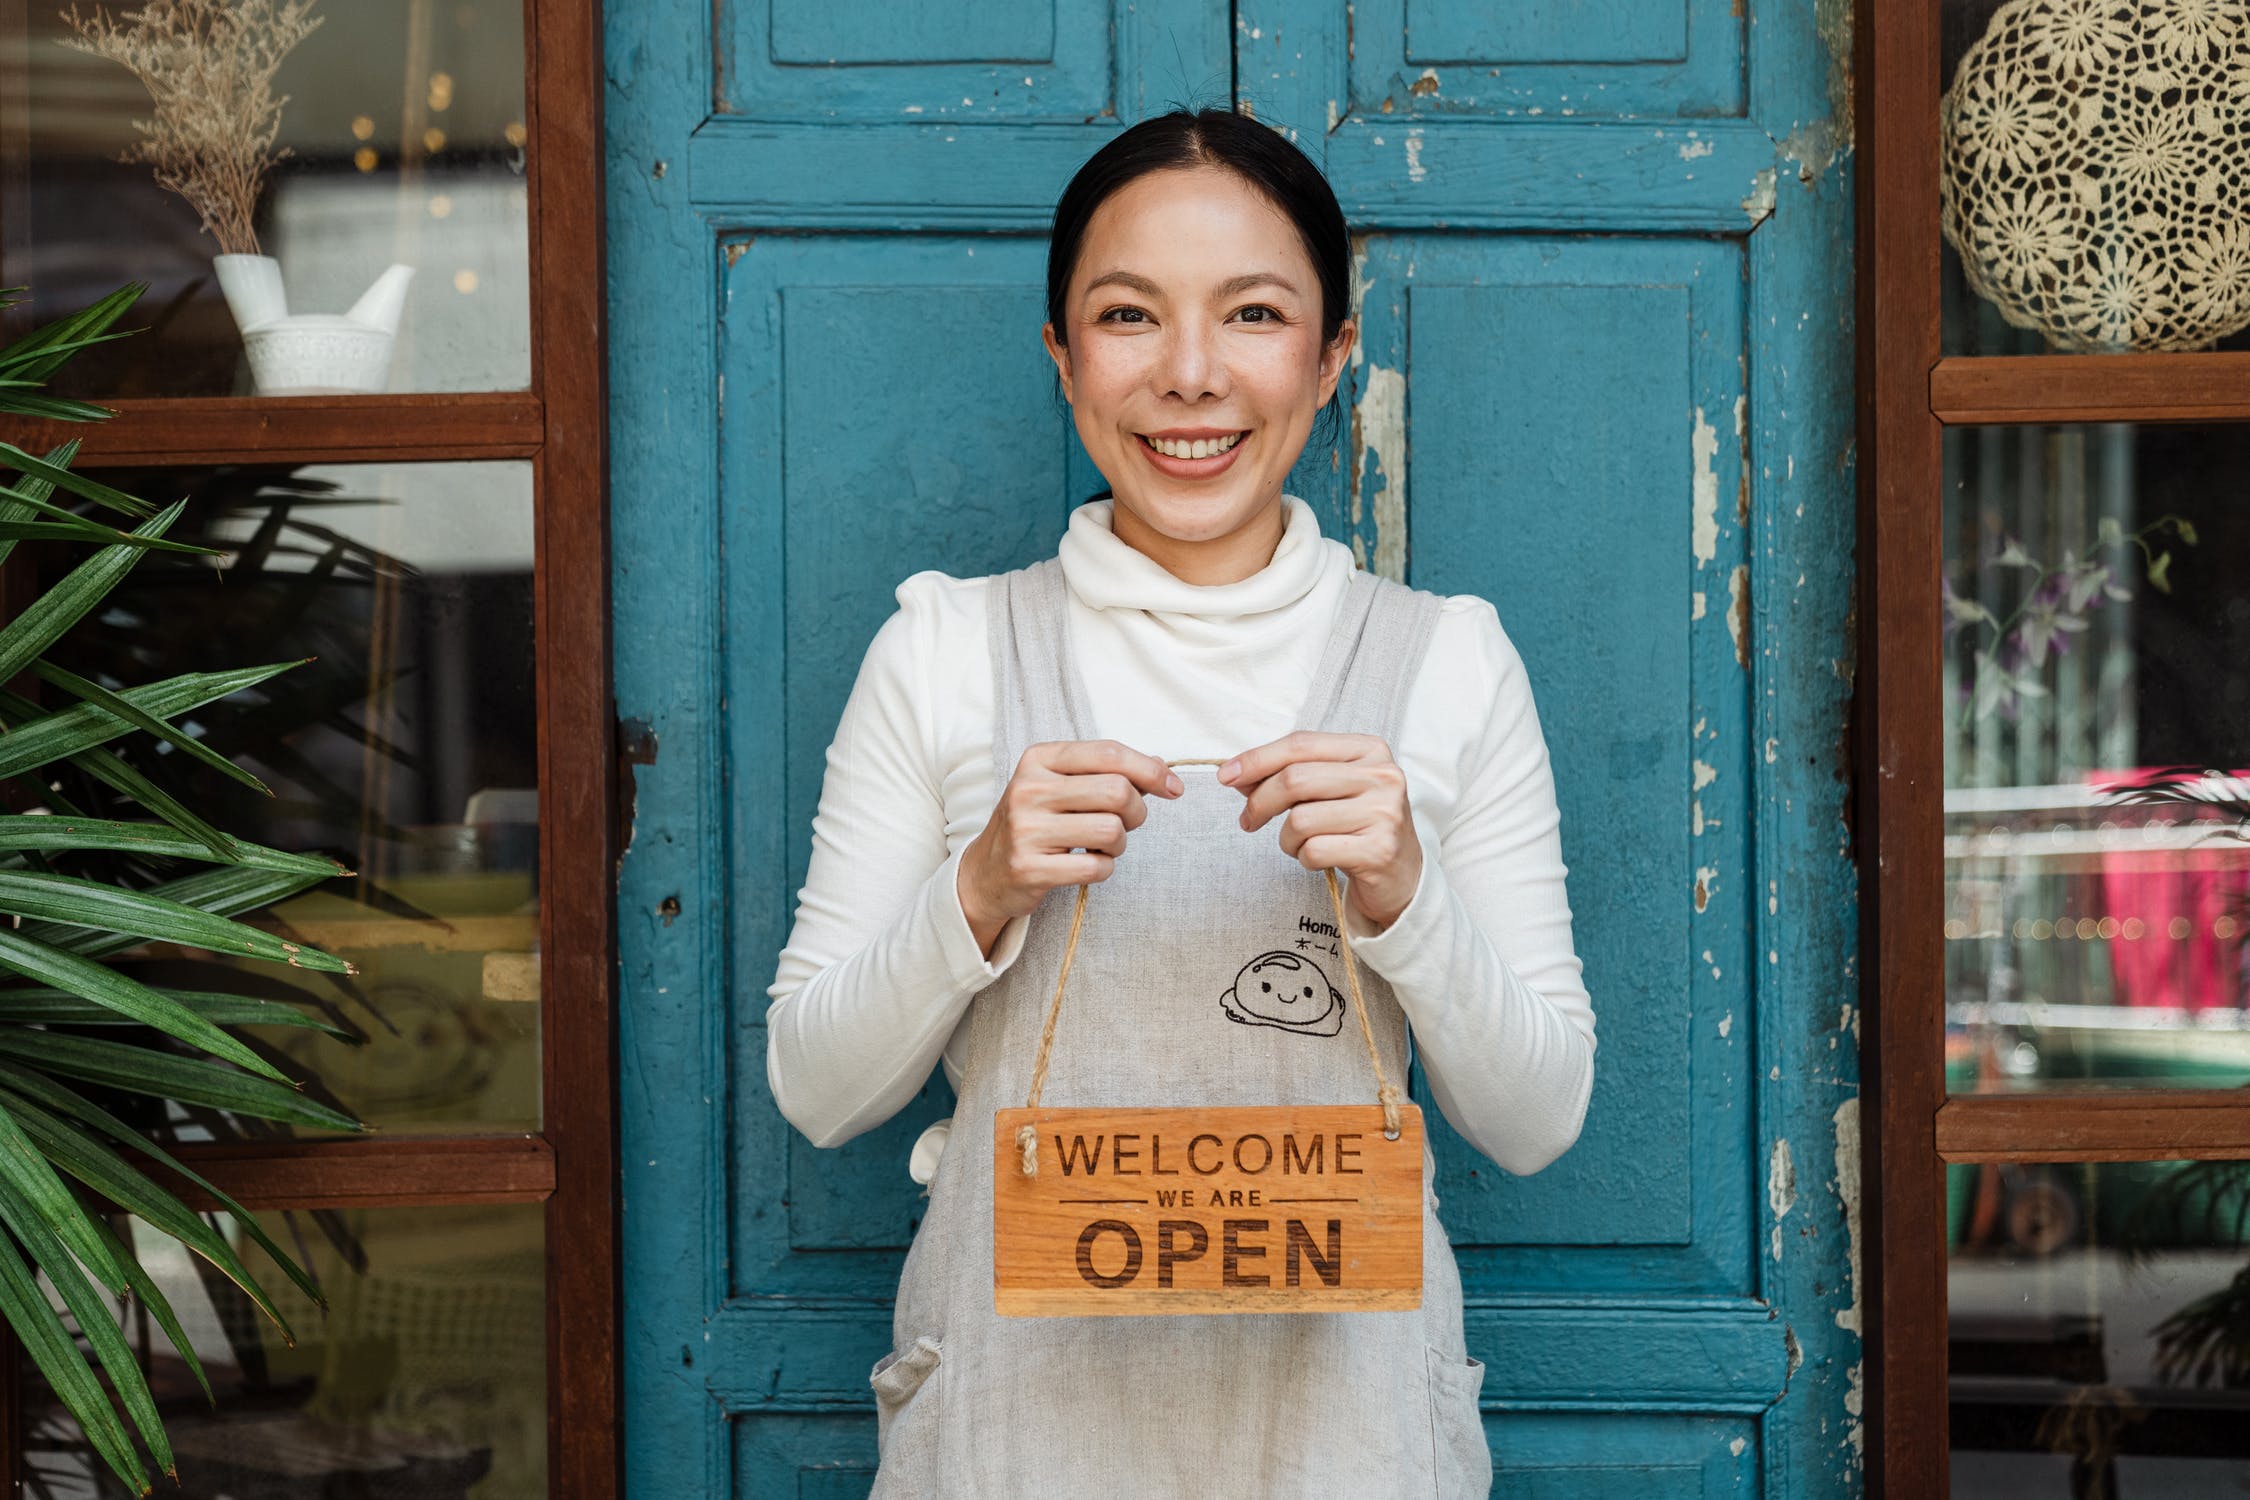 Small Business Owner holding "Open" sign